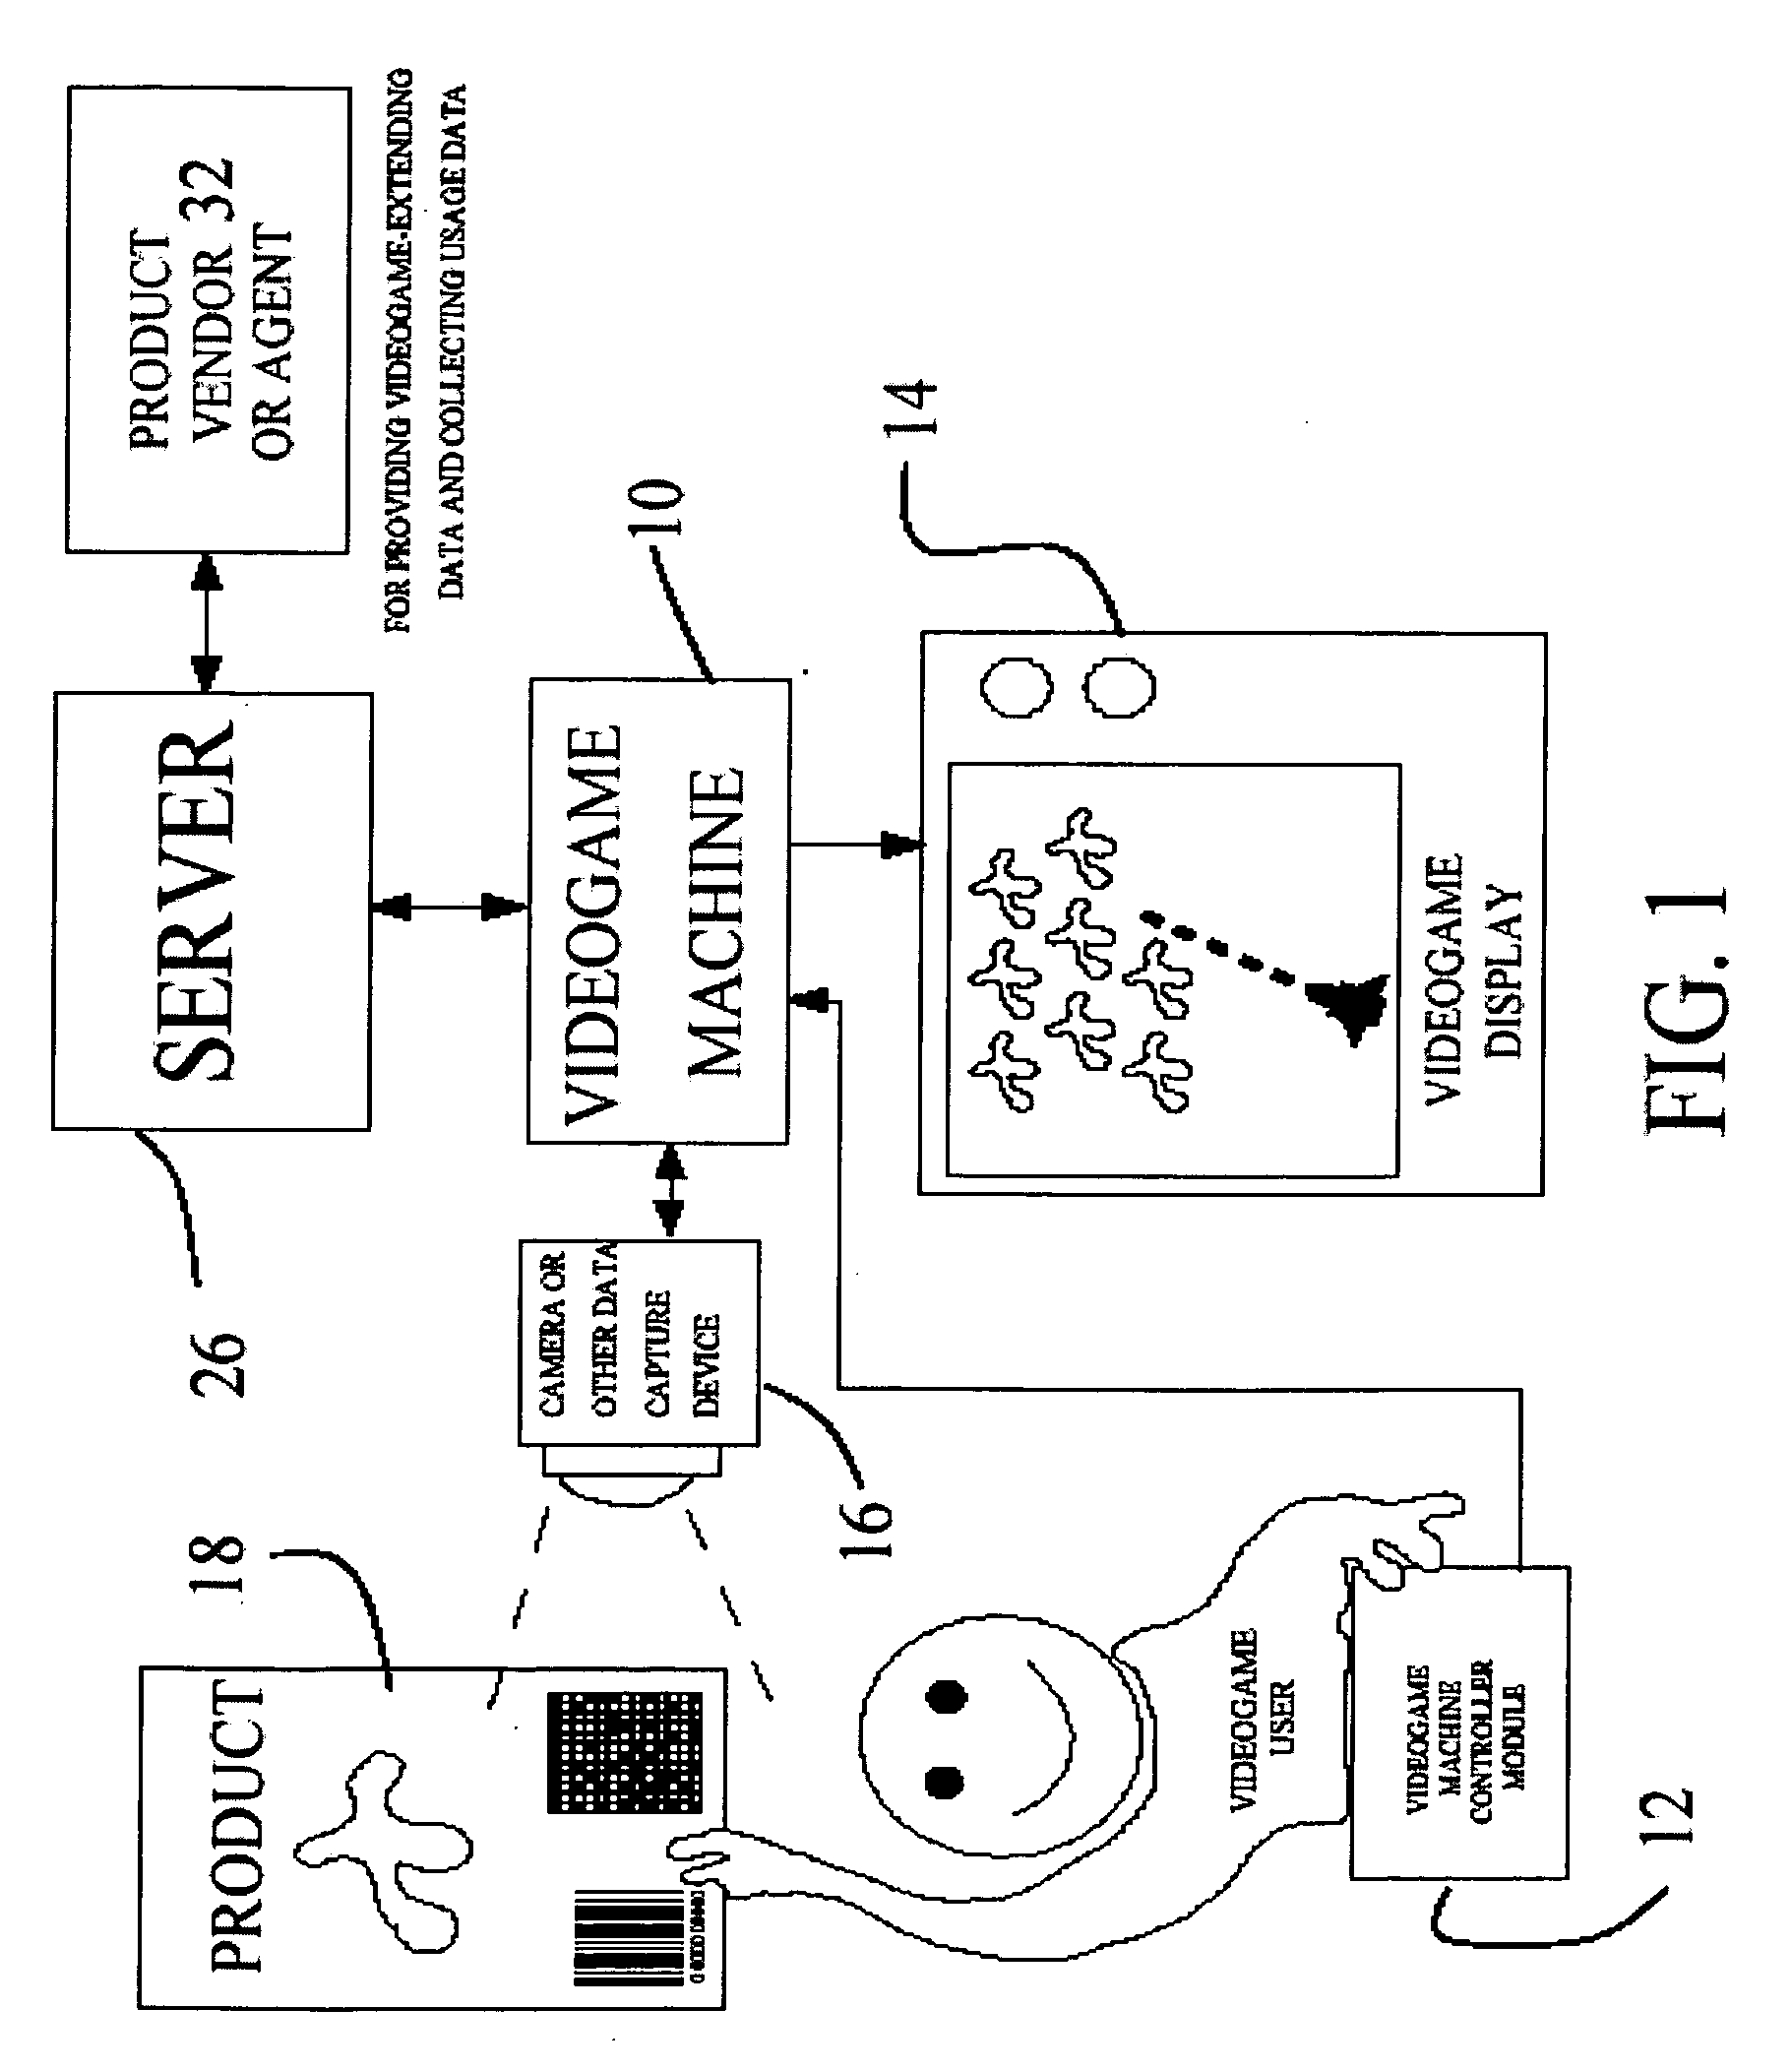 Method and apparatus for dynamic enhancement of video games with vendor specific data